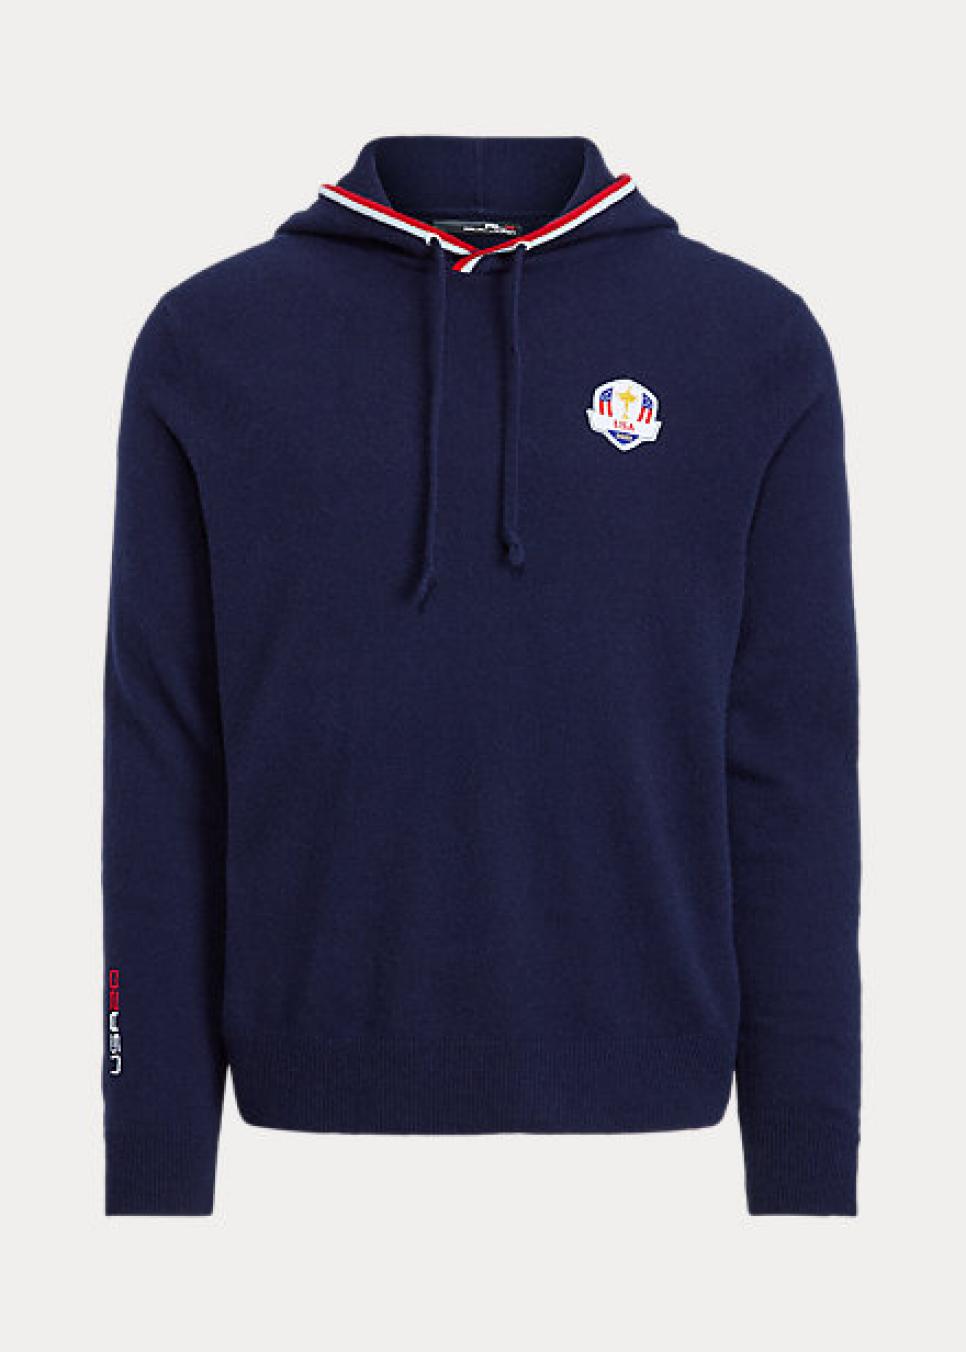 RLX U.S. Ryder Cup Cashmere Hooded Sweater